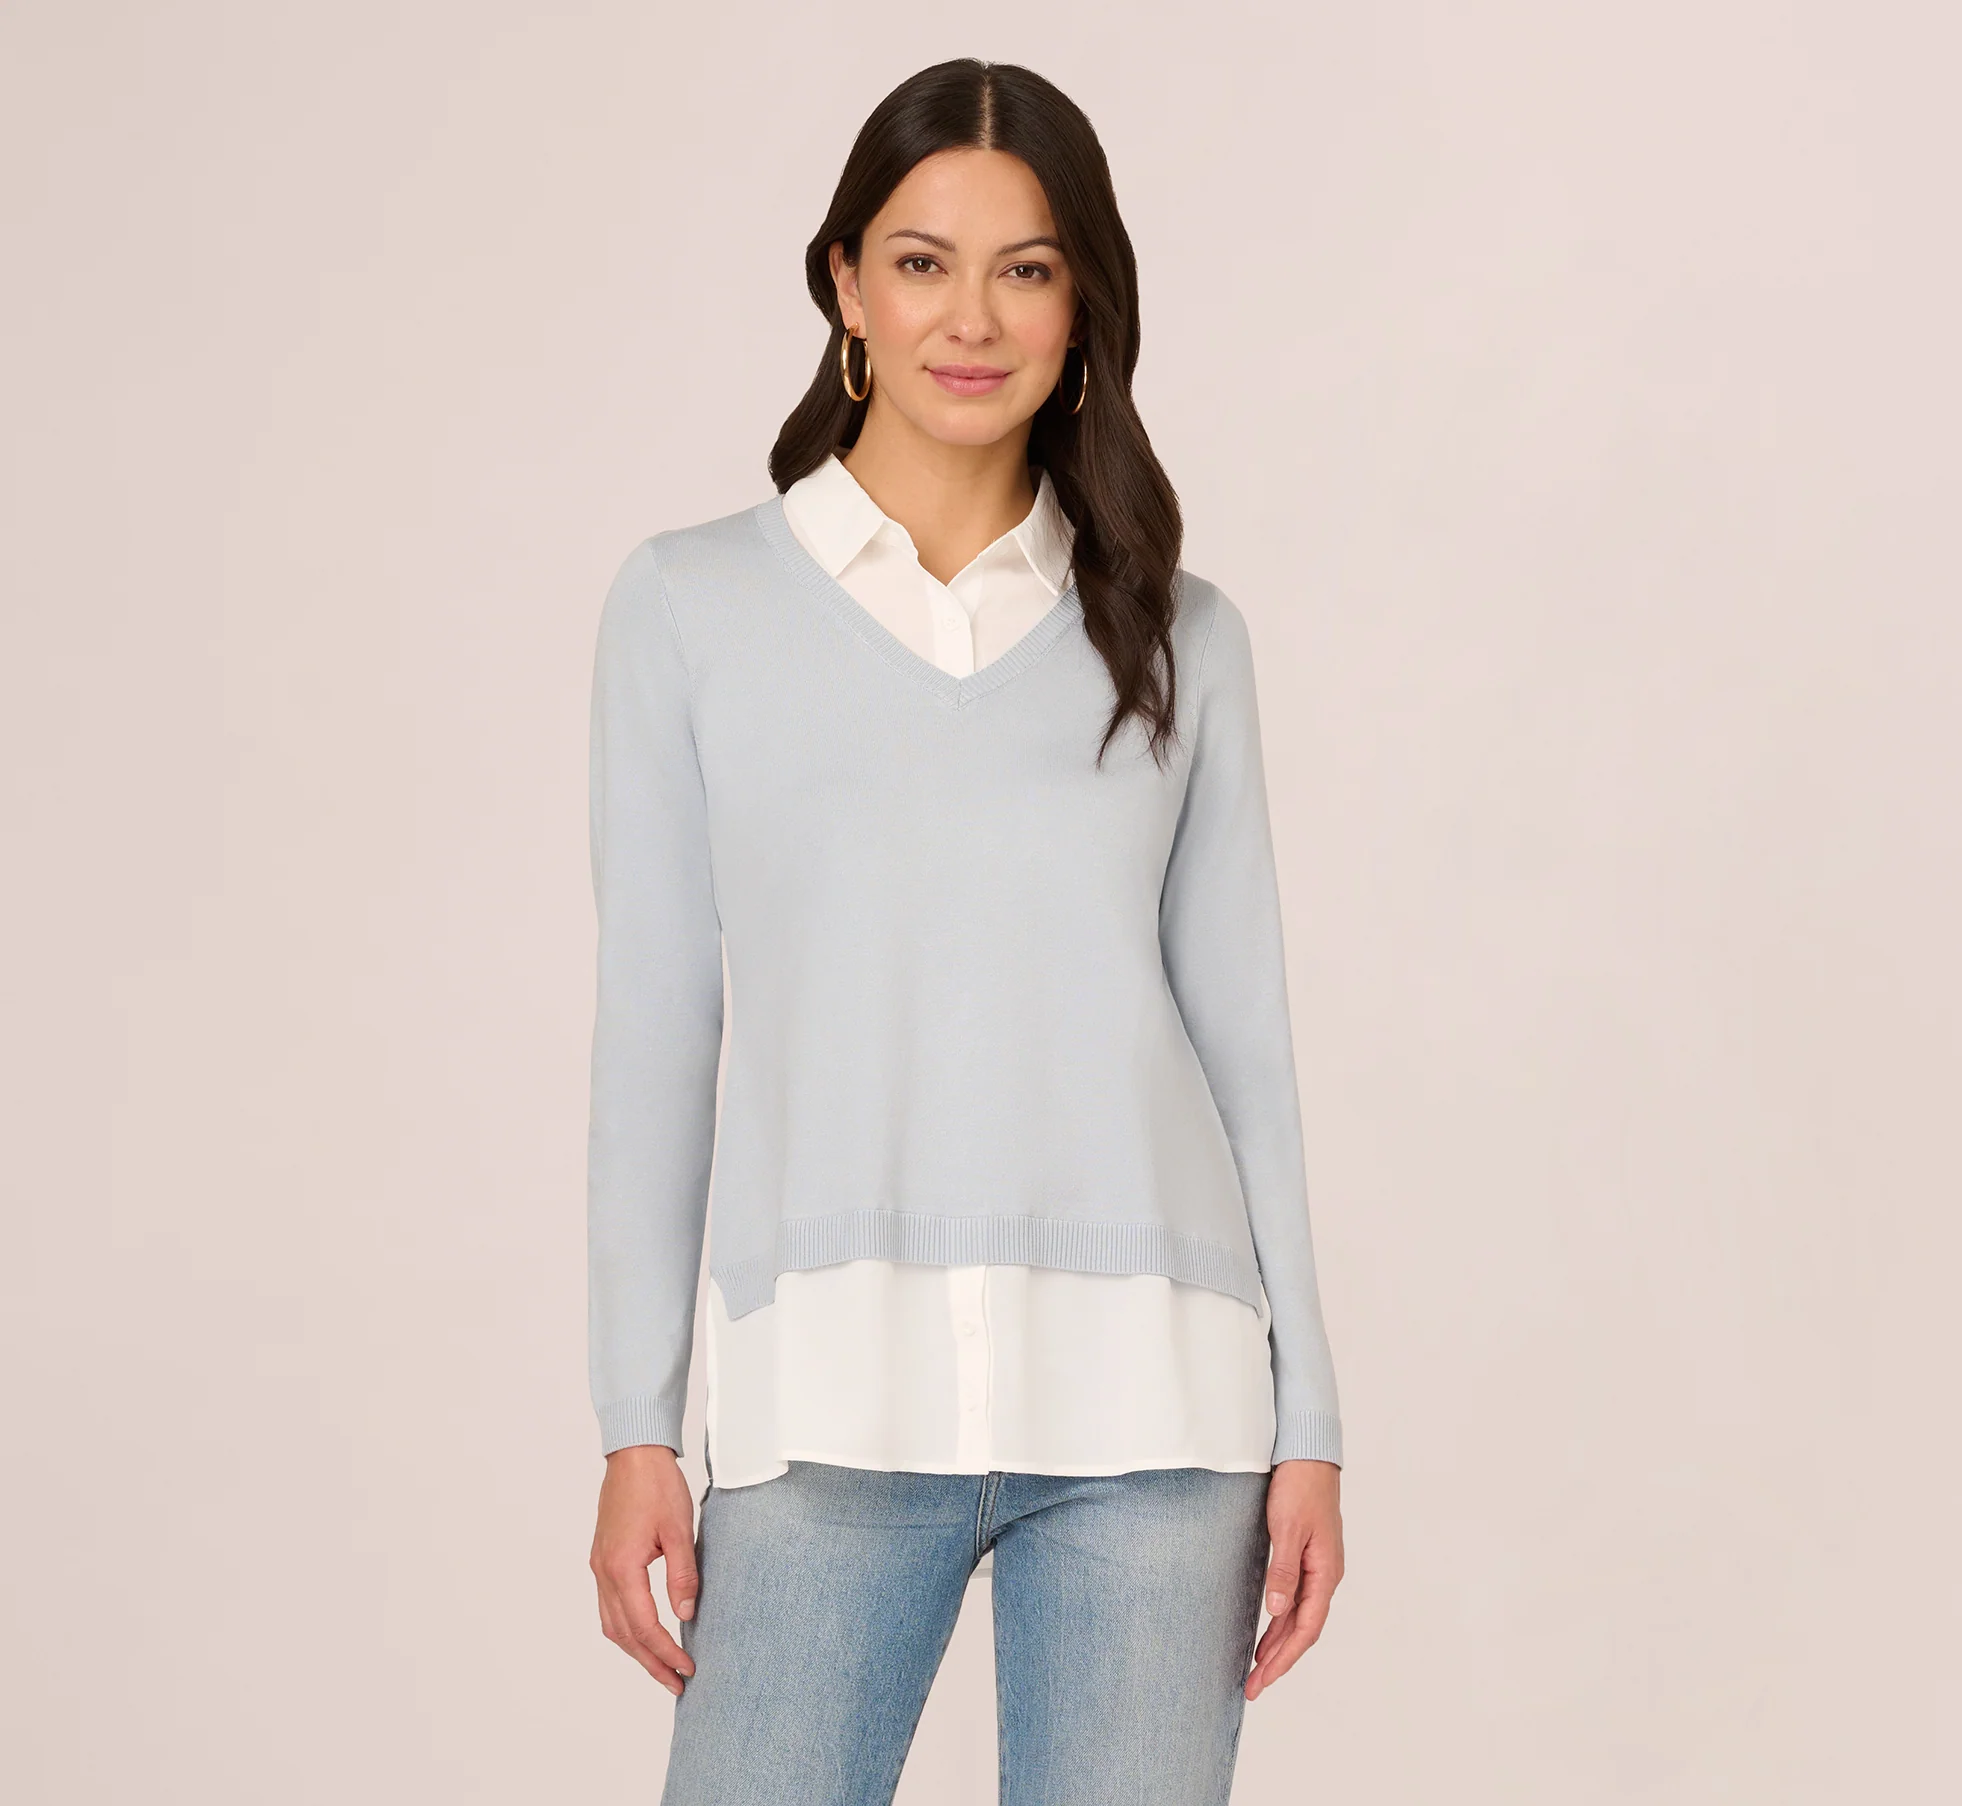 LONG SLEEVE TWOFER COLLARED KNIT TOP IN NIAGARA MIST IVORY